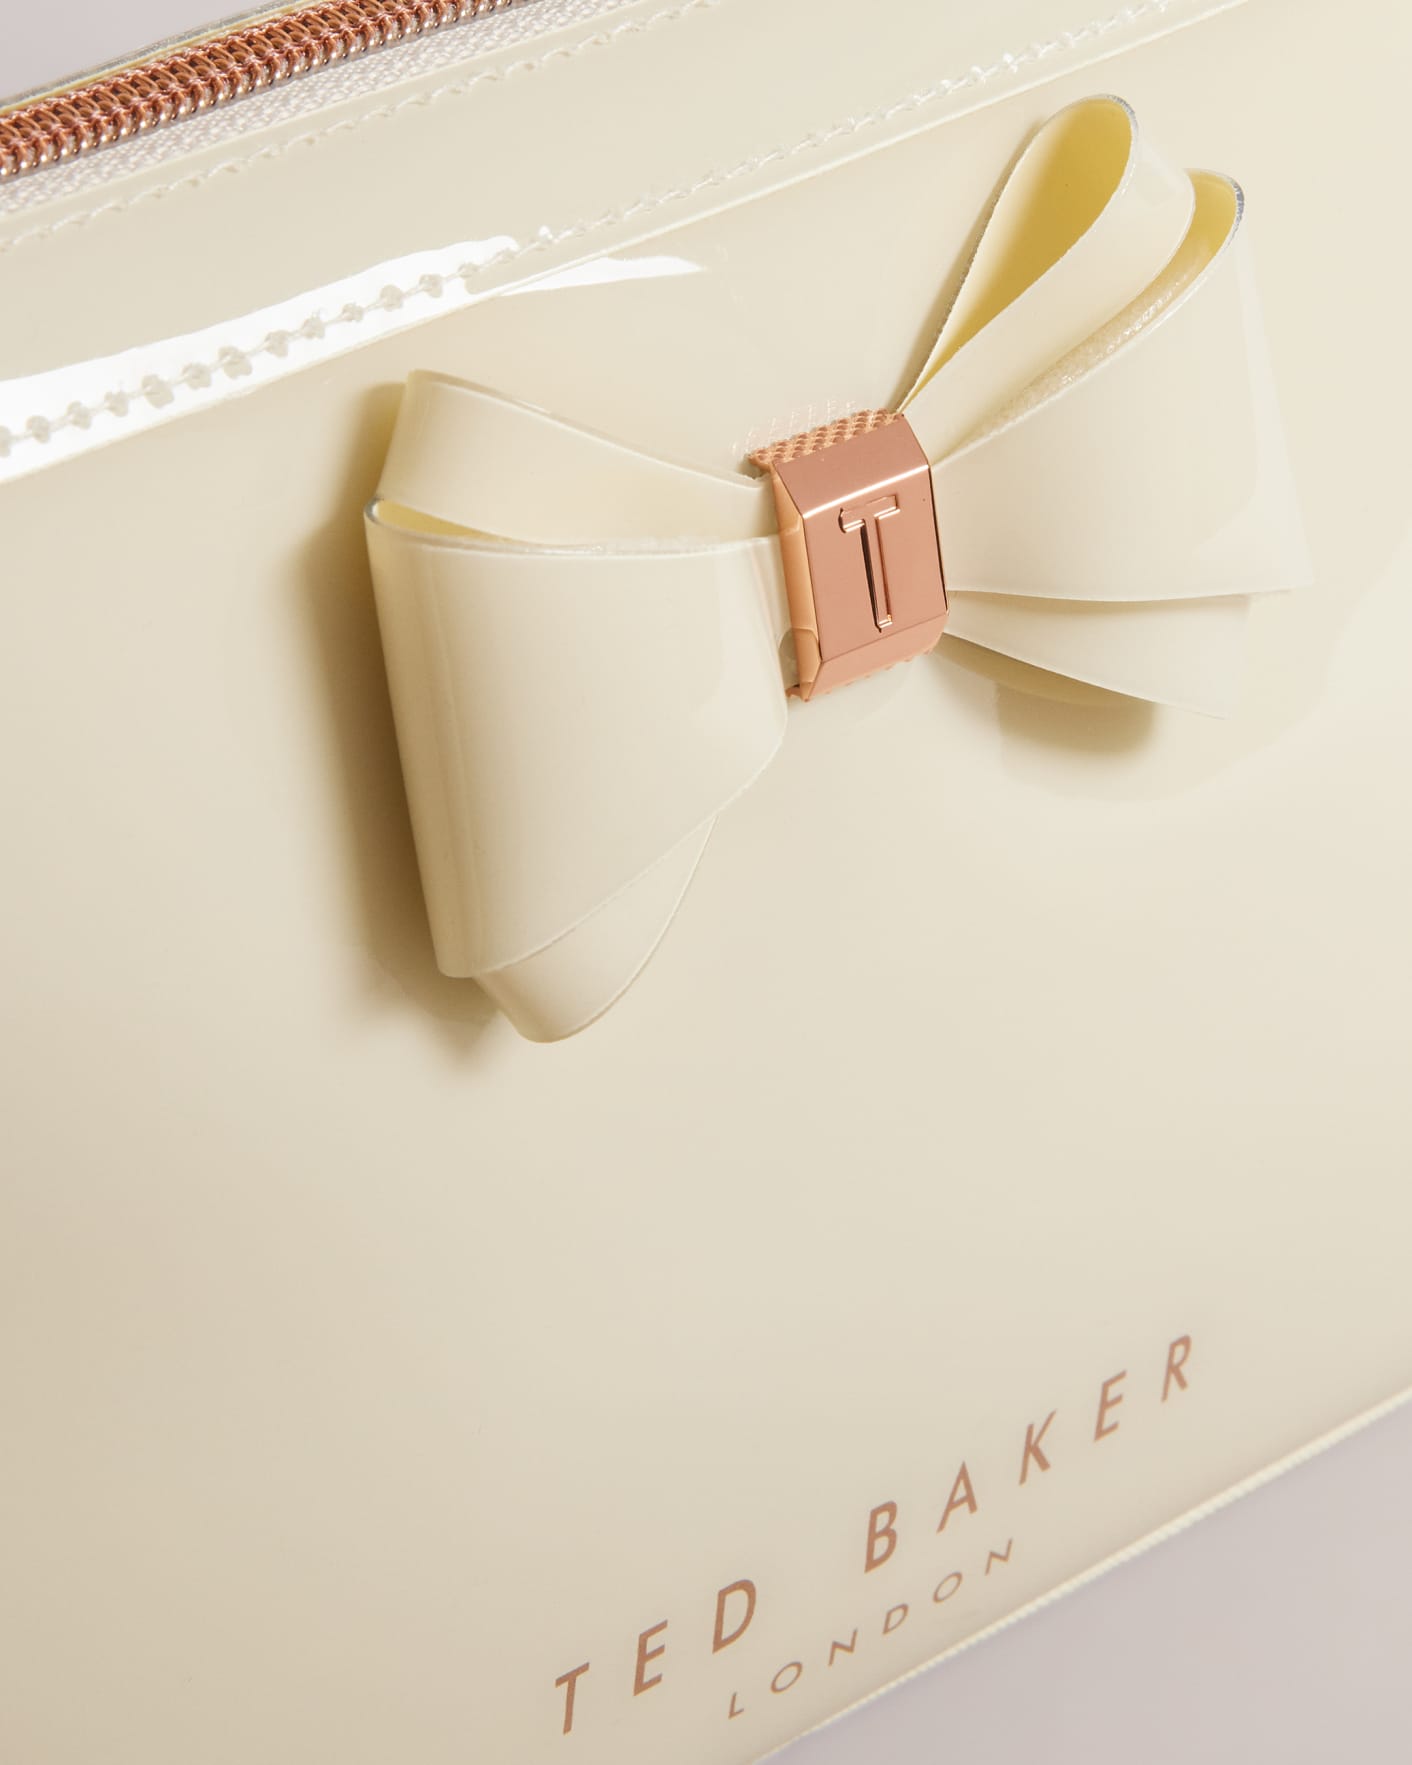 Ivory Curved Bow Wash Bag Ted Baker